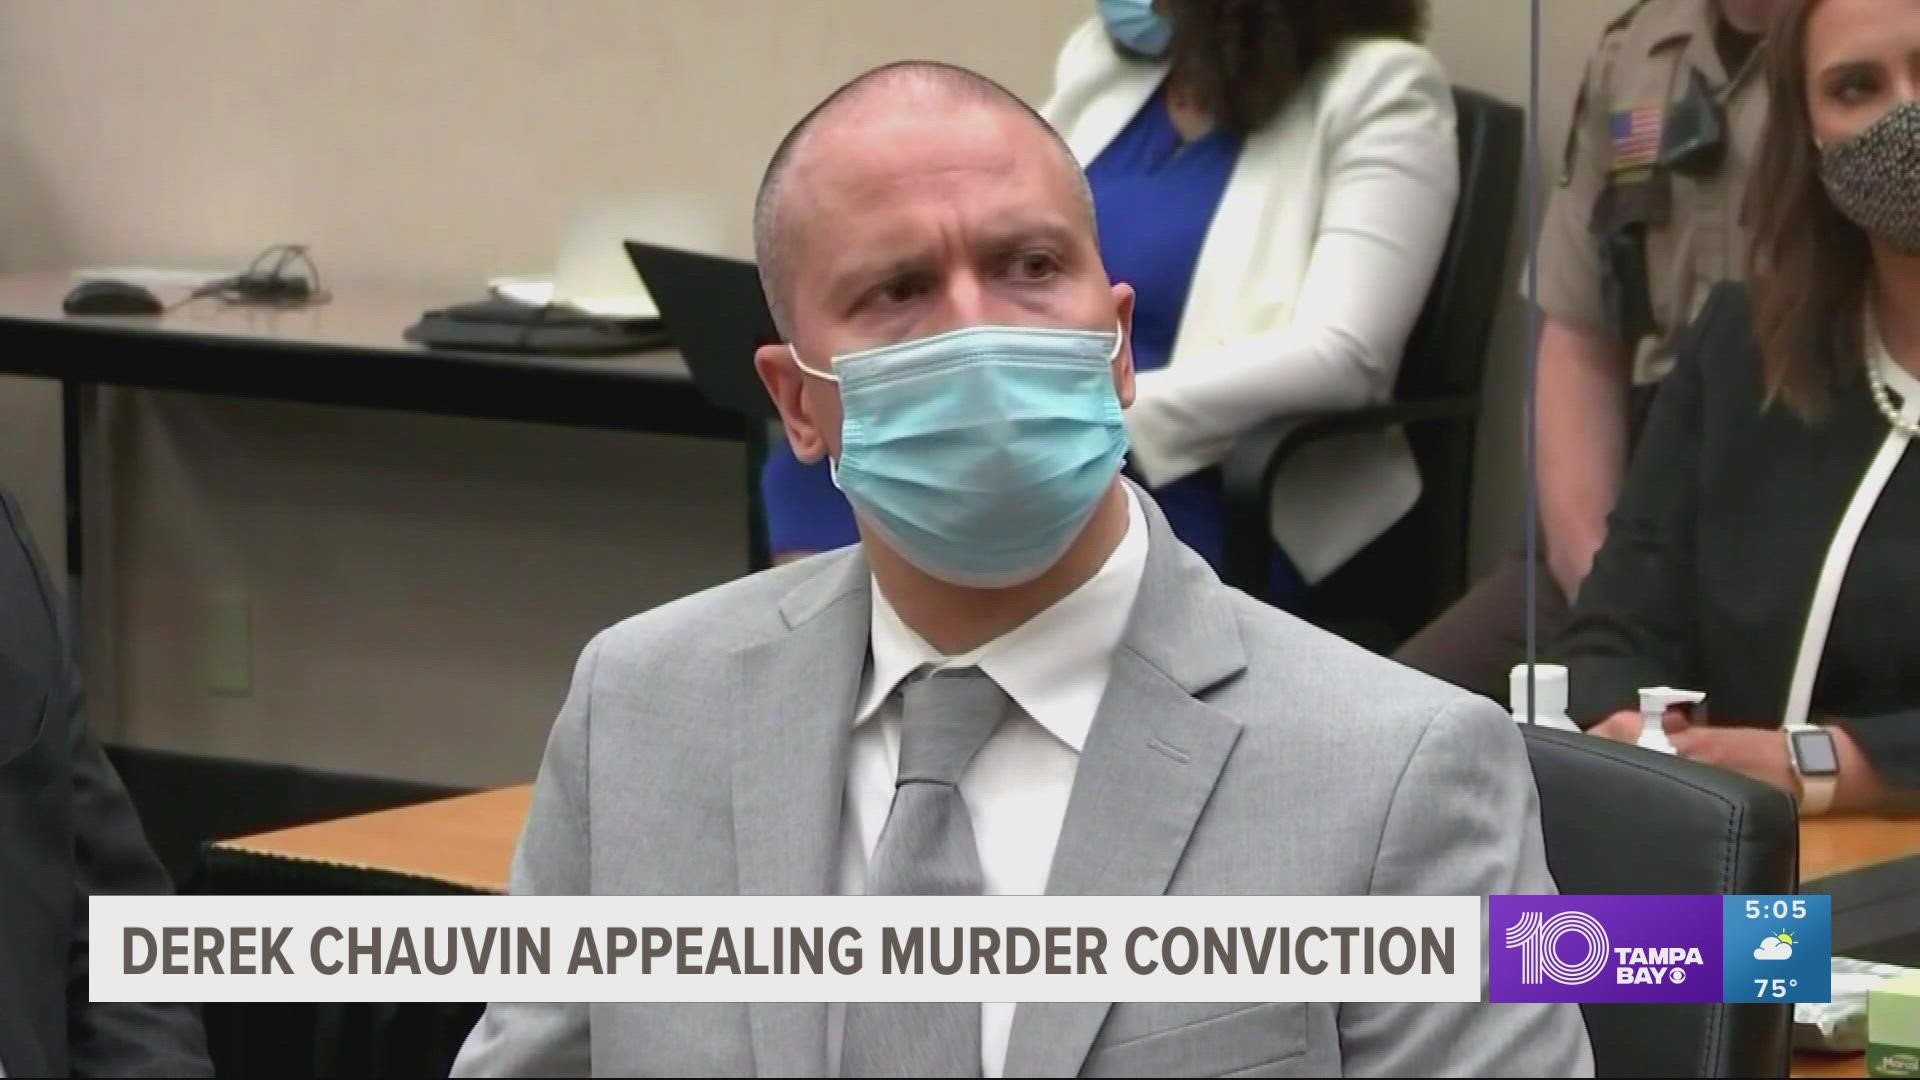 Chauvin's attorney argued that the former Minneapolis police officer wasn't given a fair trial in state court due in part to pretrial publicity and other factors.